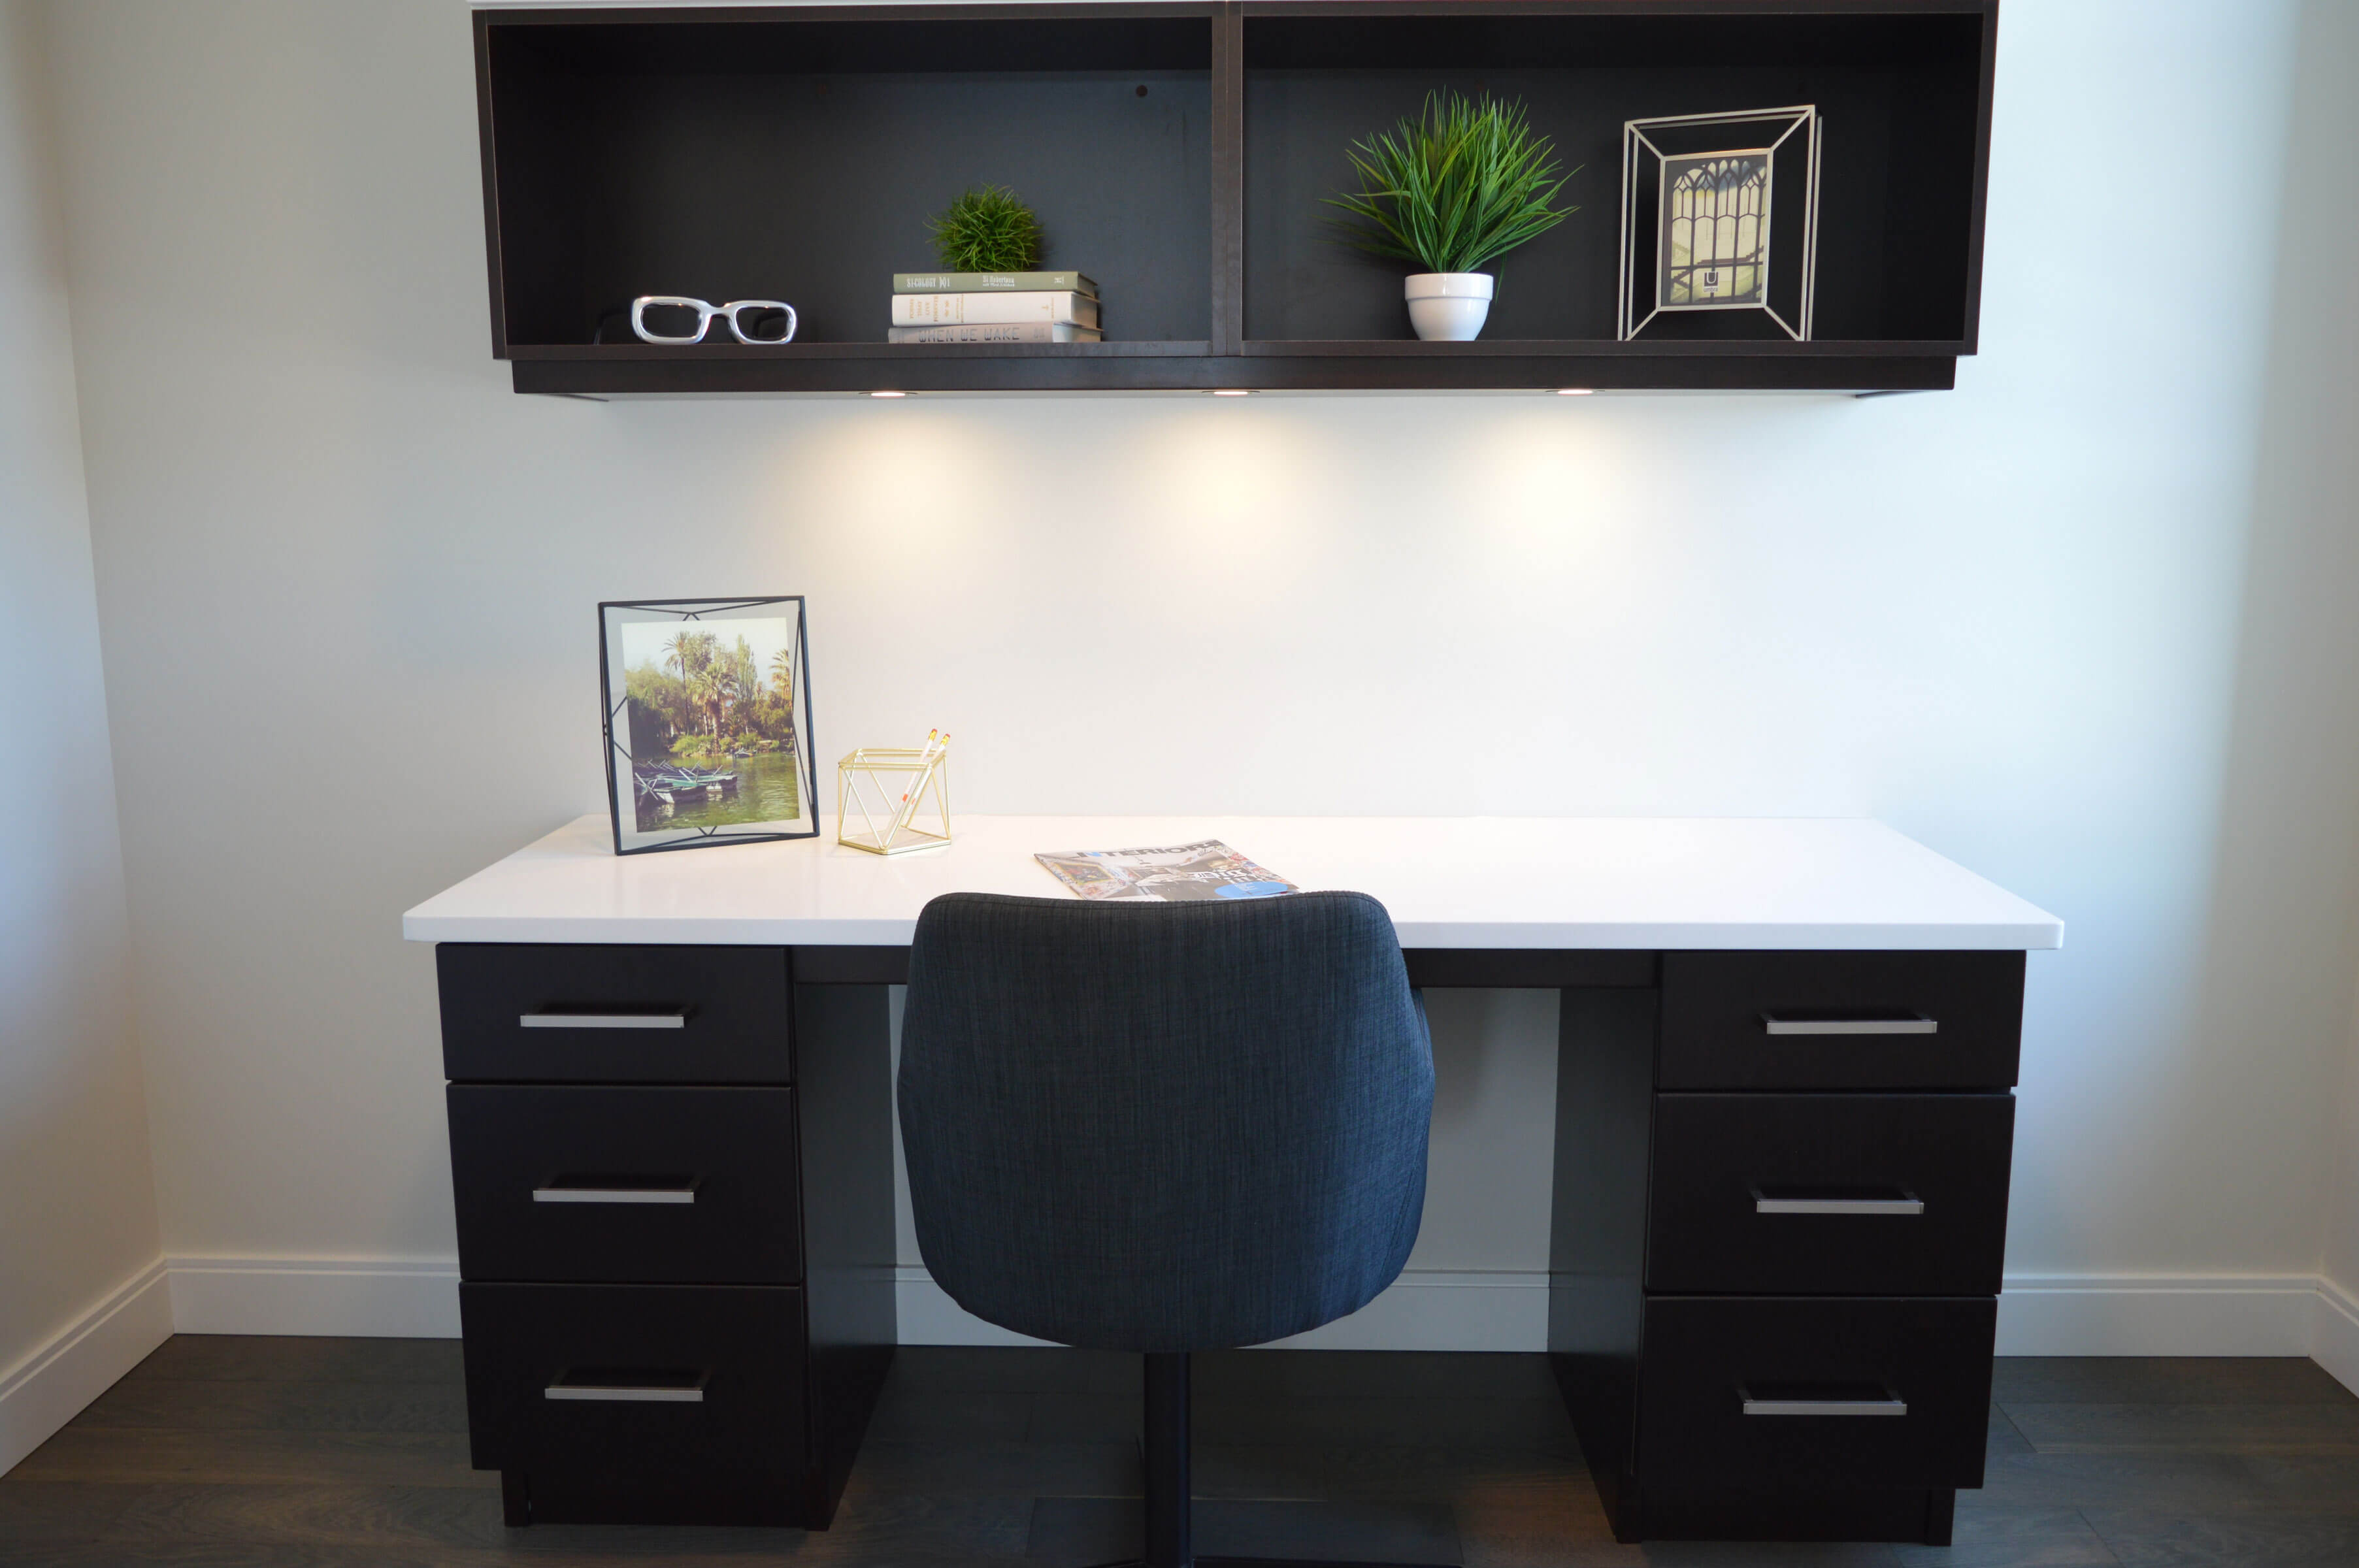 Where Should You Place Your Desk in a Home Office?